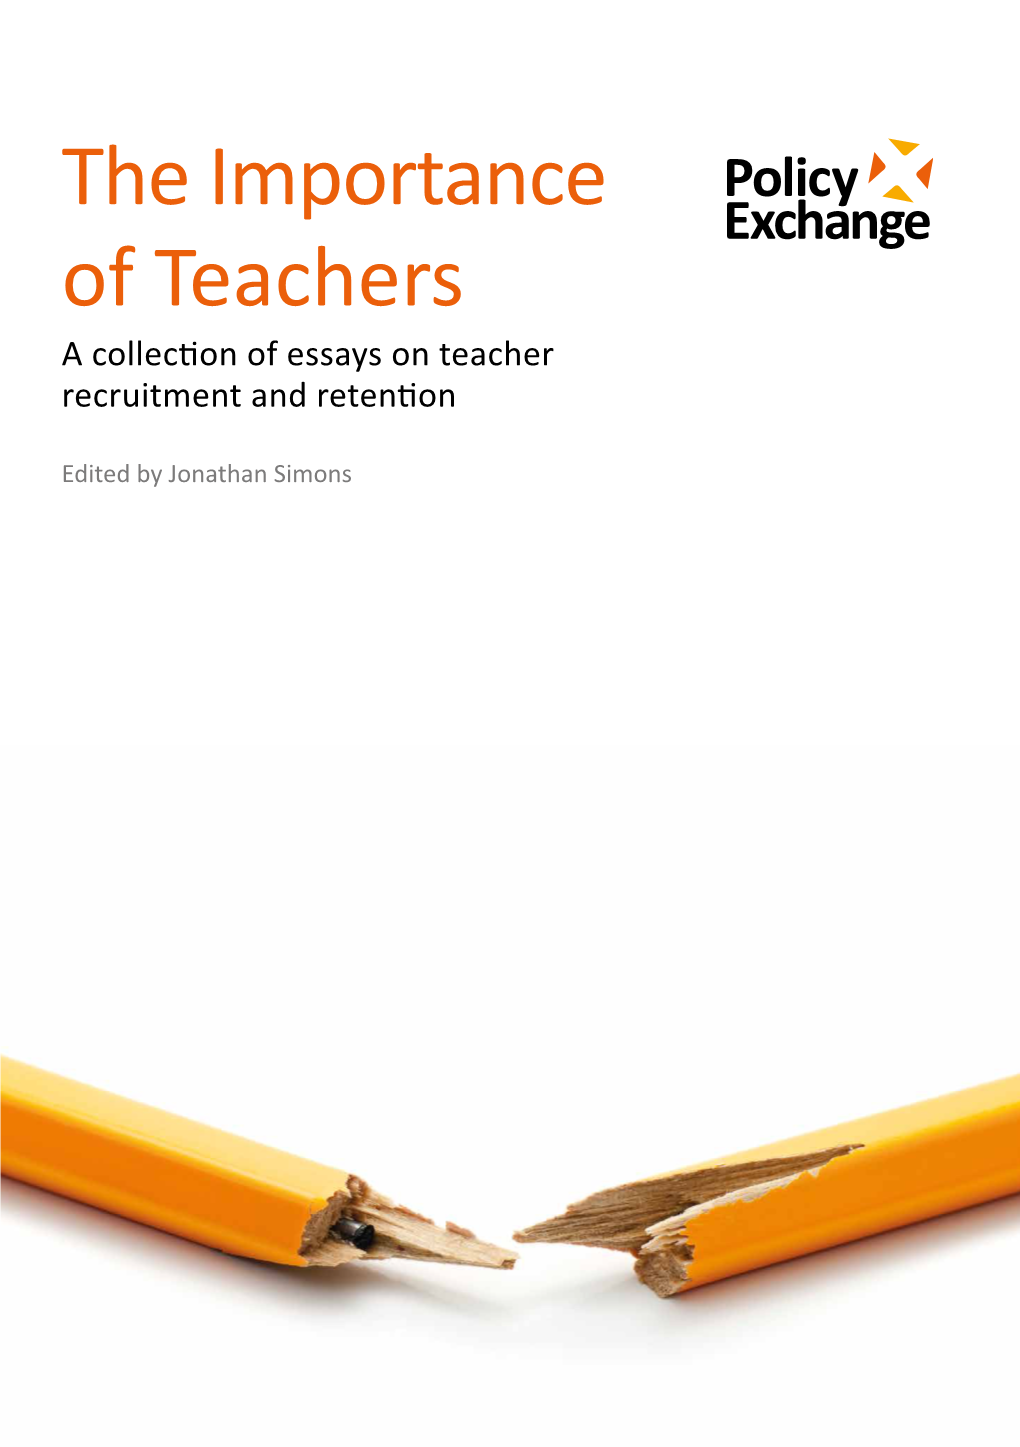 The Importance of Teachers a Collection of Essays on Teacher Recruitment and Retention